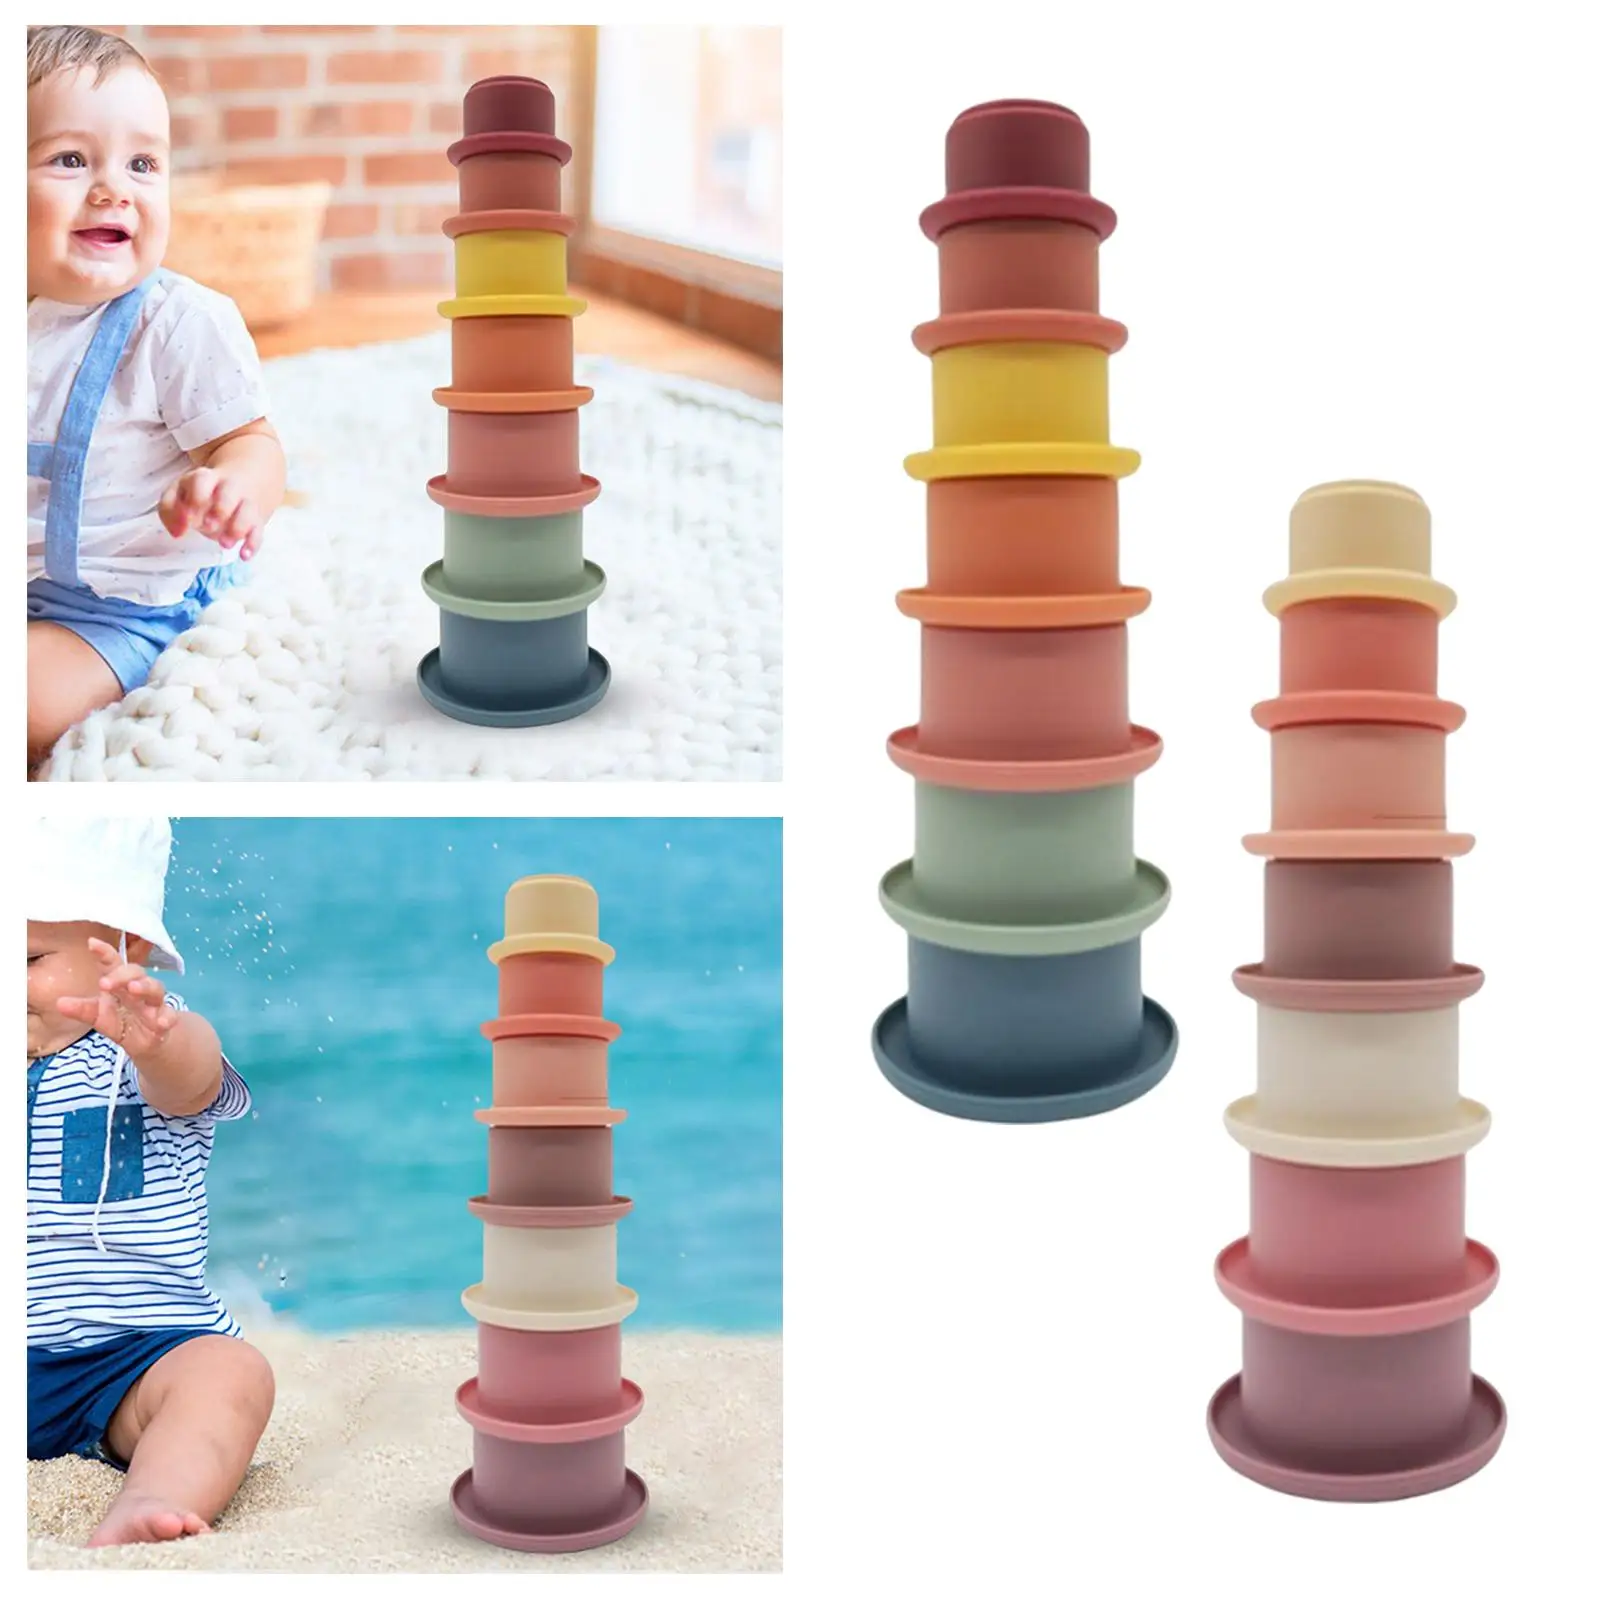 7x Fun Stacking Cups Toy Learning Sorting and Building Blocks Soft Bathing Toy Stack up Cup for Kids Boys Girls Toddler Baby